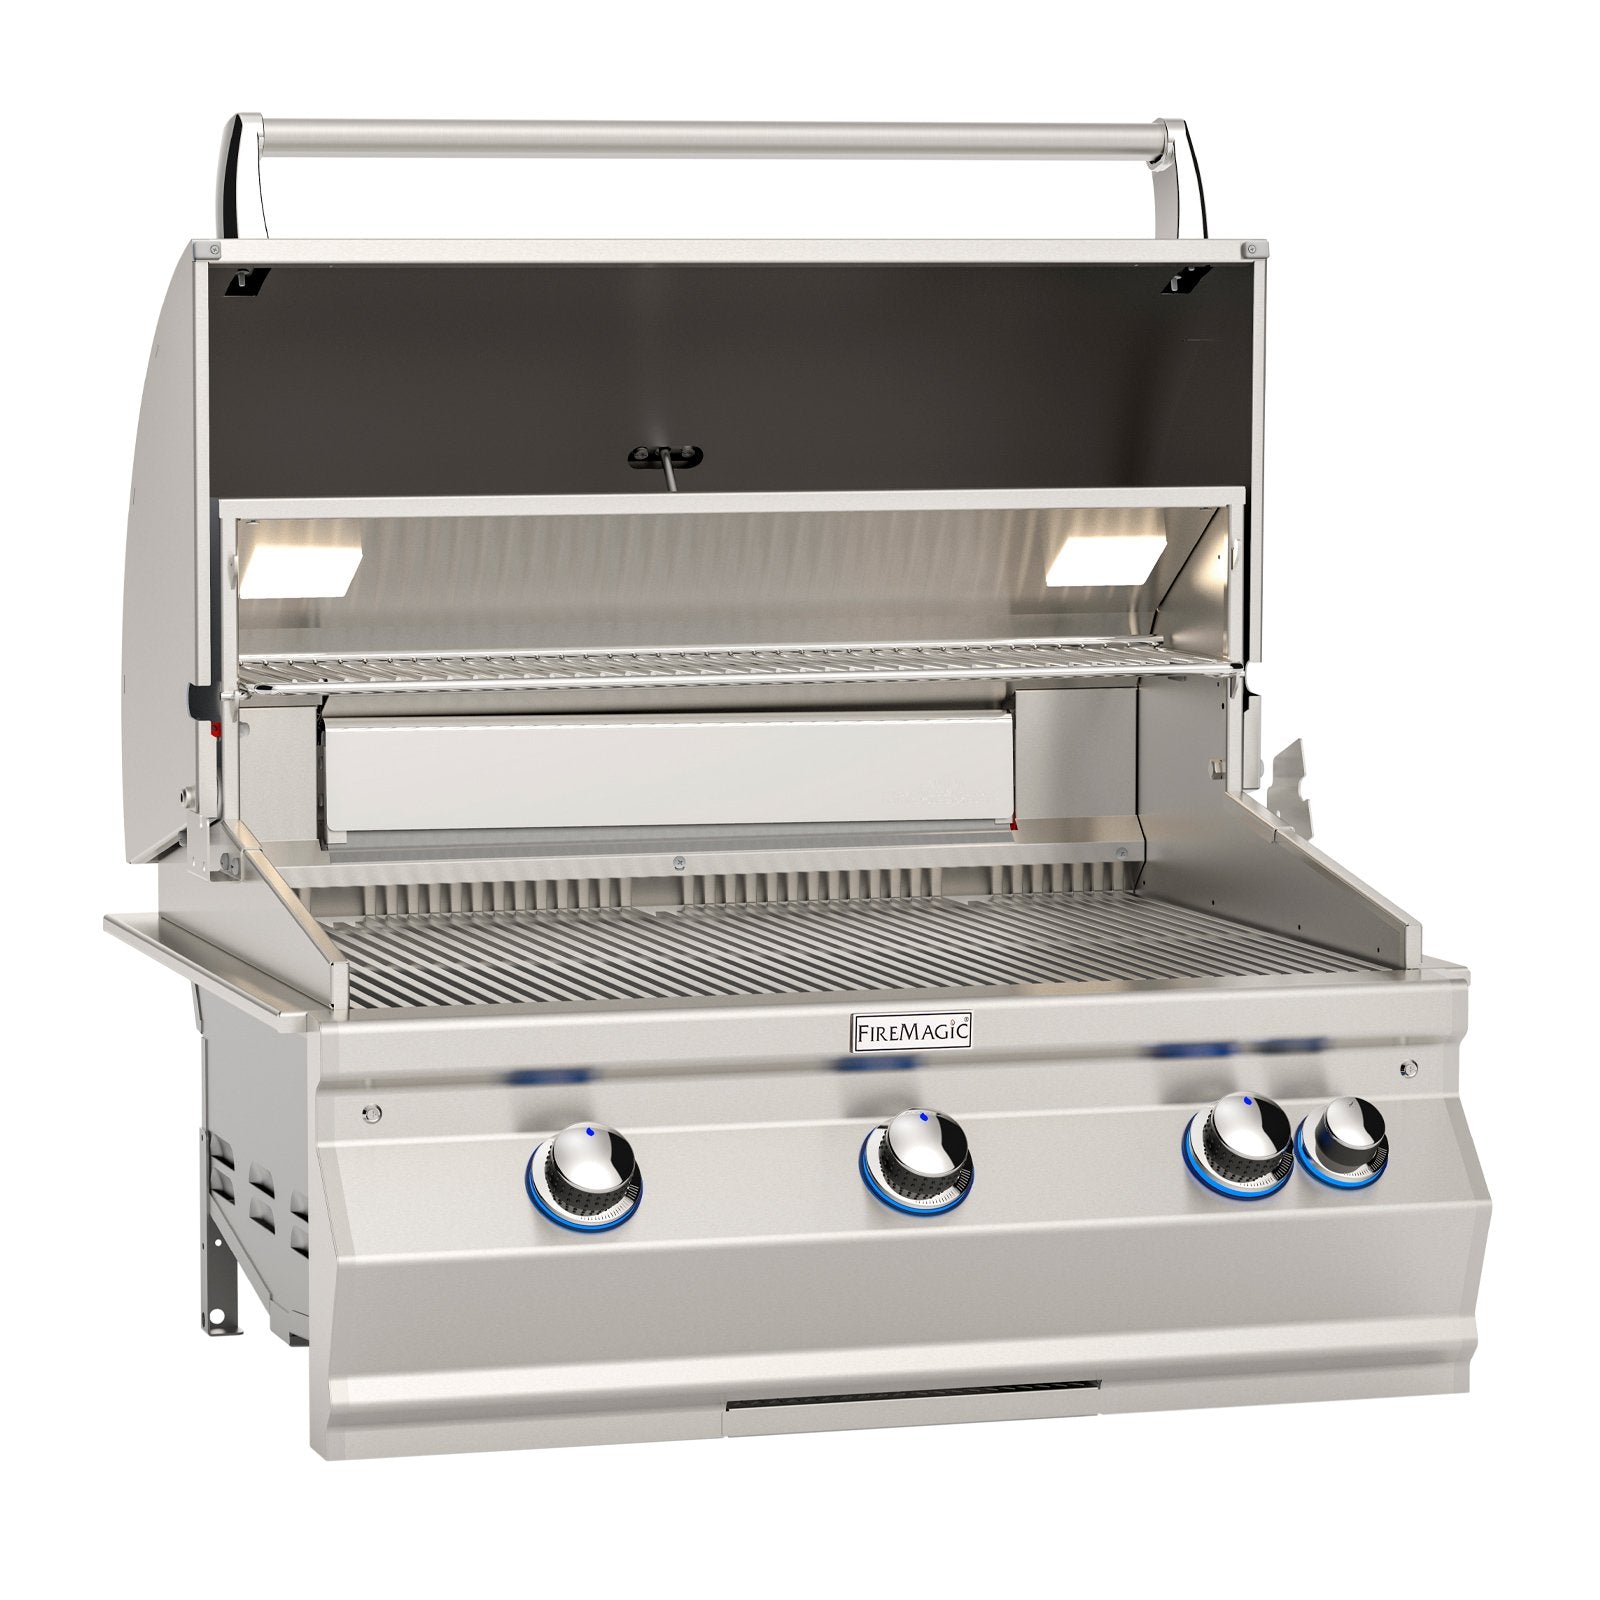 fire-magic-30-a660i-built-in-gas-grill-w-infra-burner-rotiss-analog-display 2